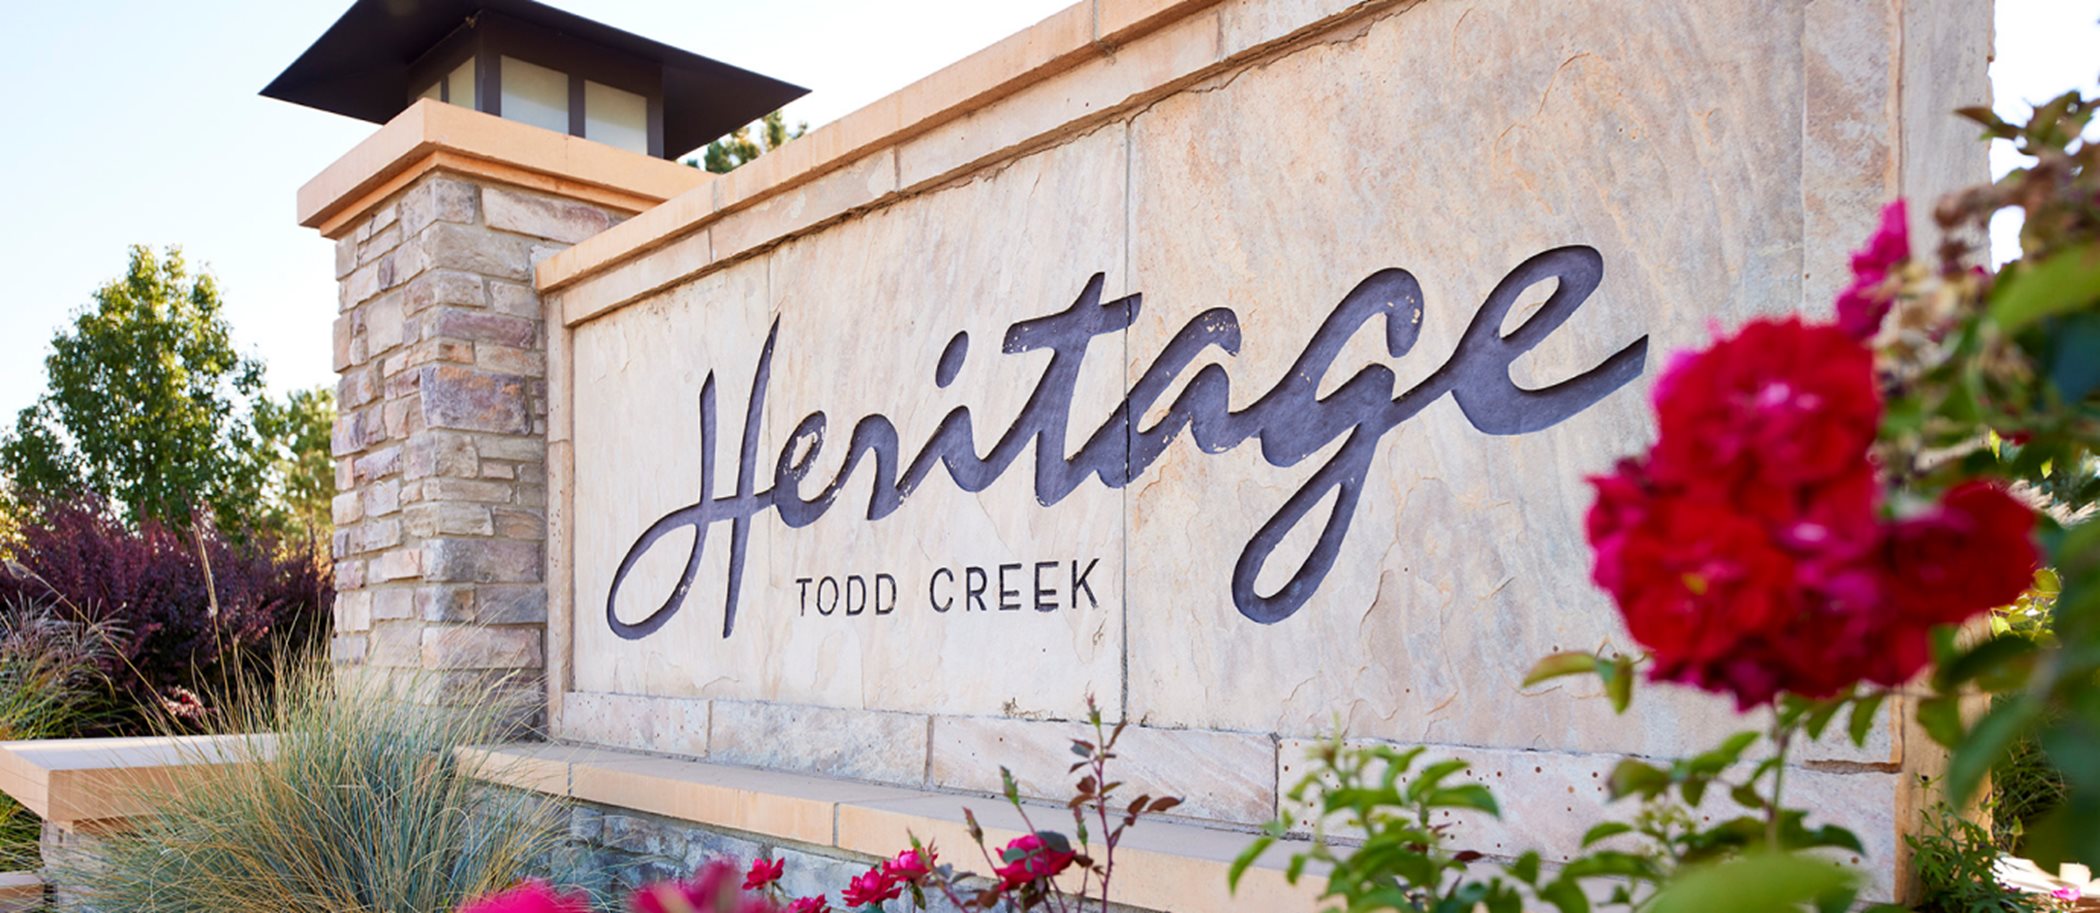 Heritage Todd Creek welcome sign